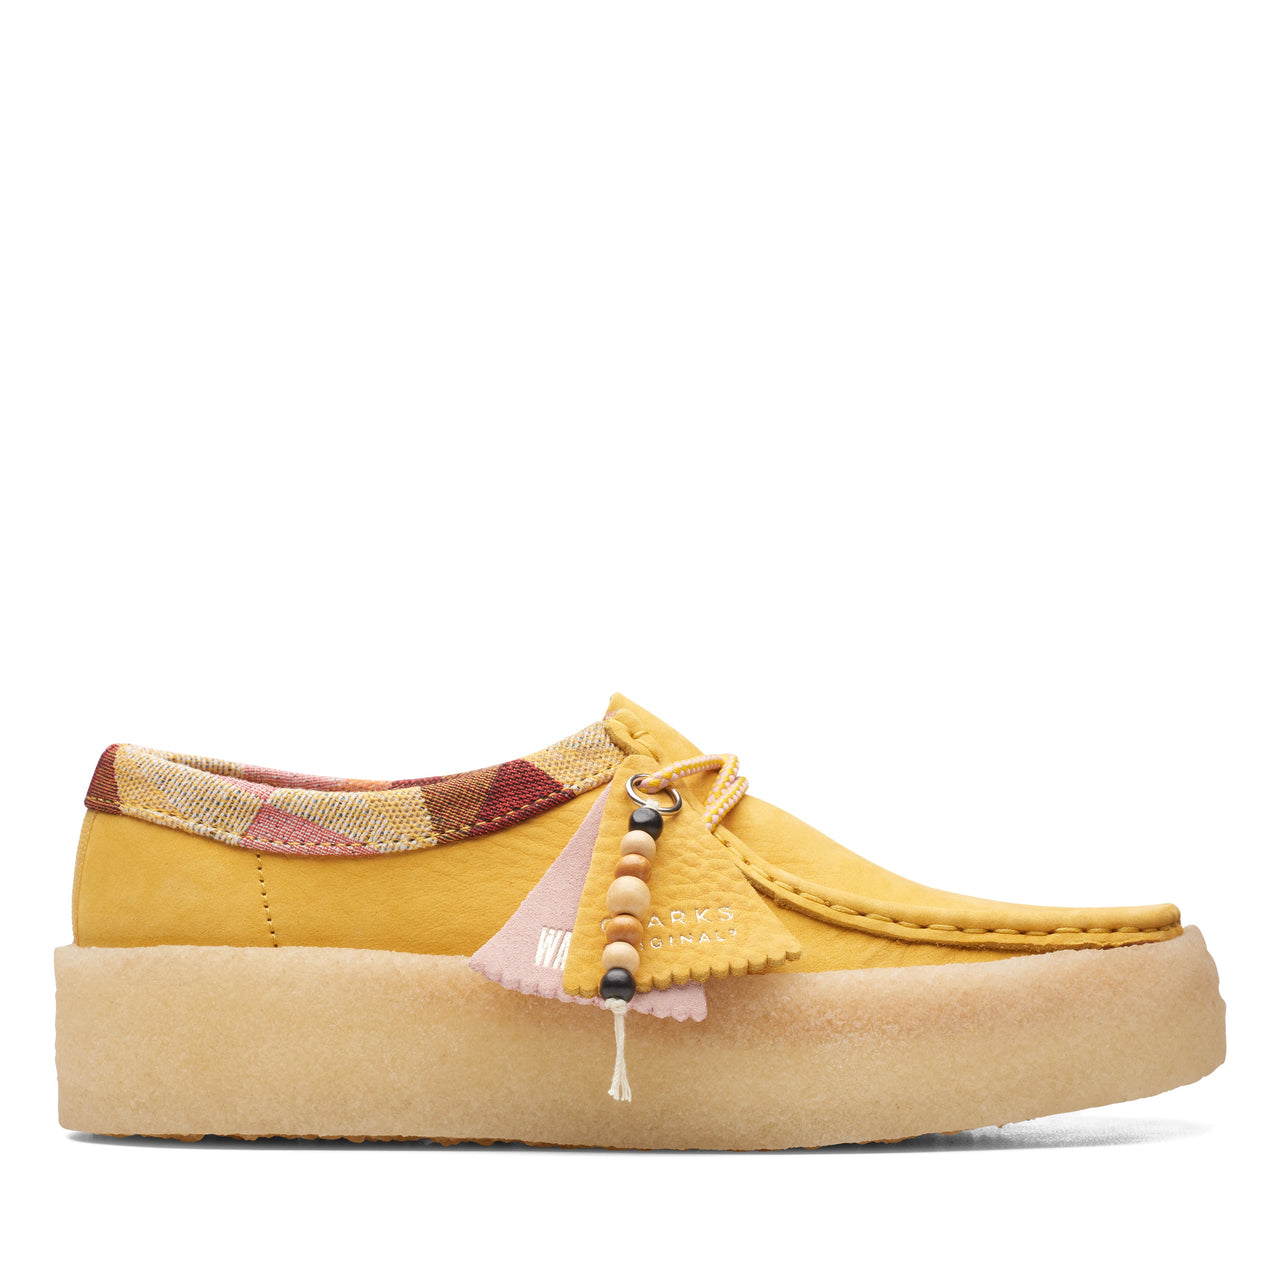 Clarks Women Wallabee Cup Shoes Yellow Nubuck side view on white background 